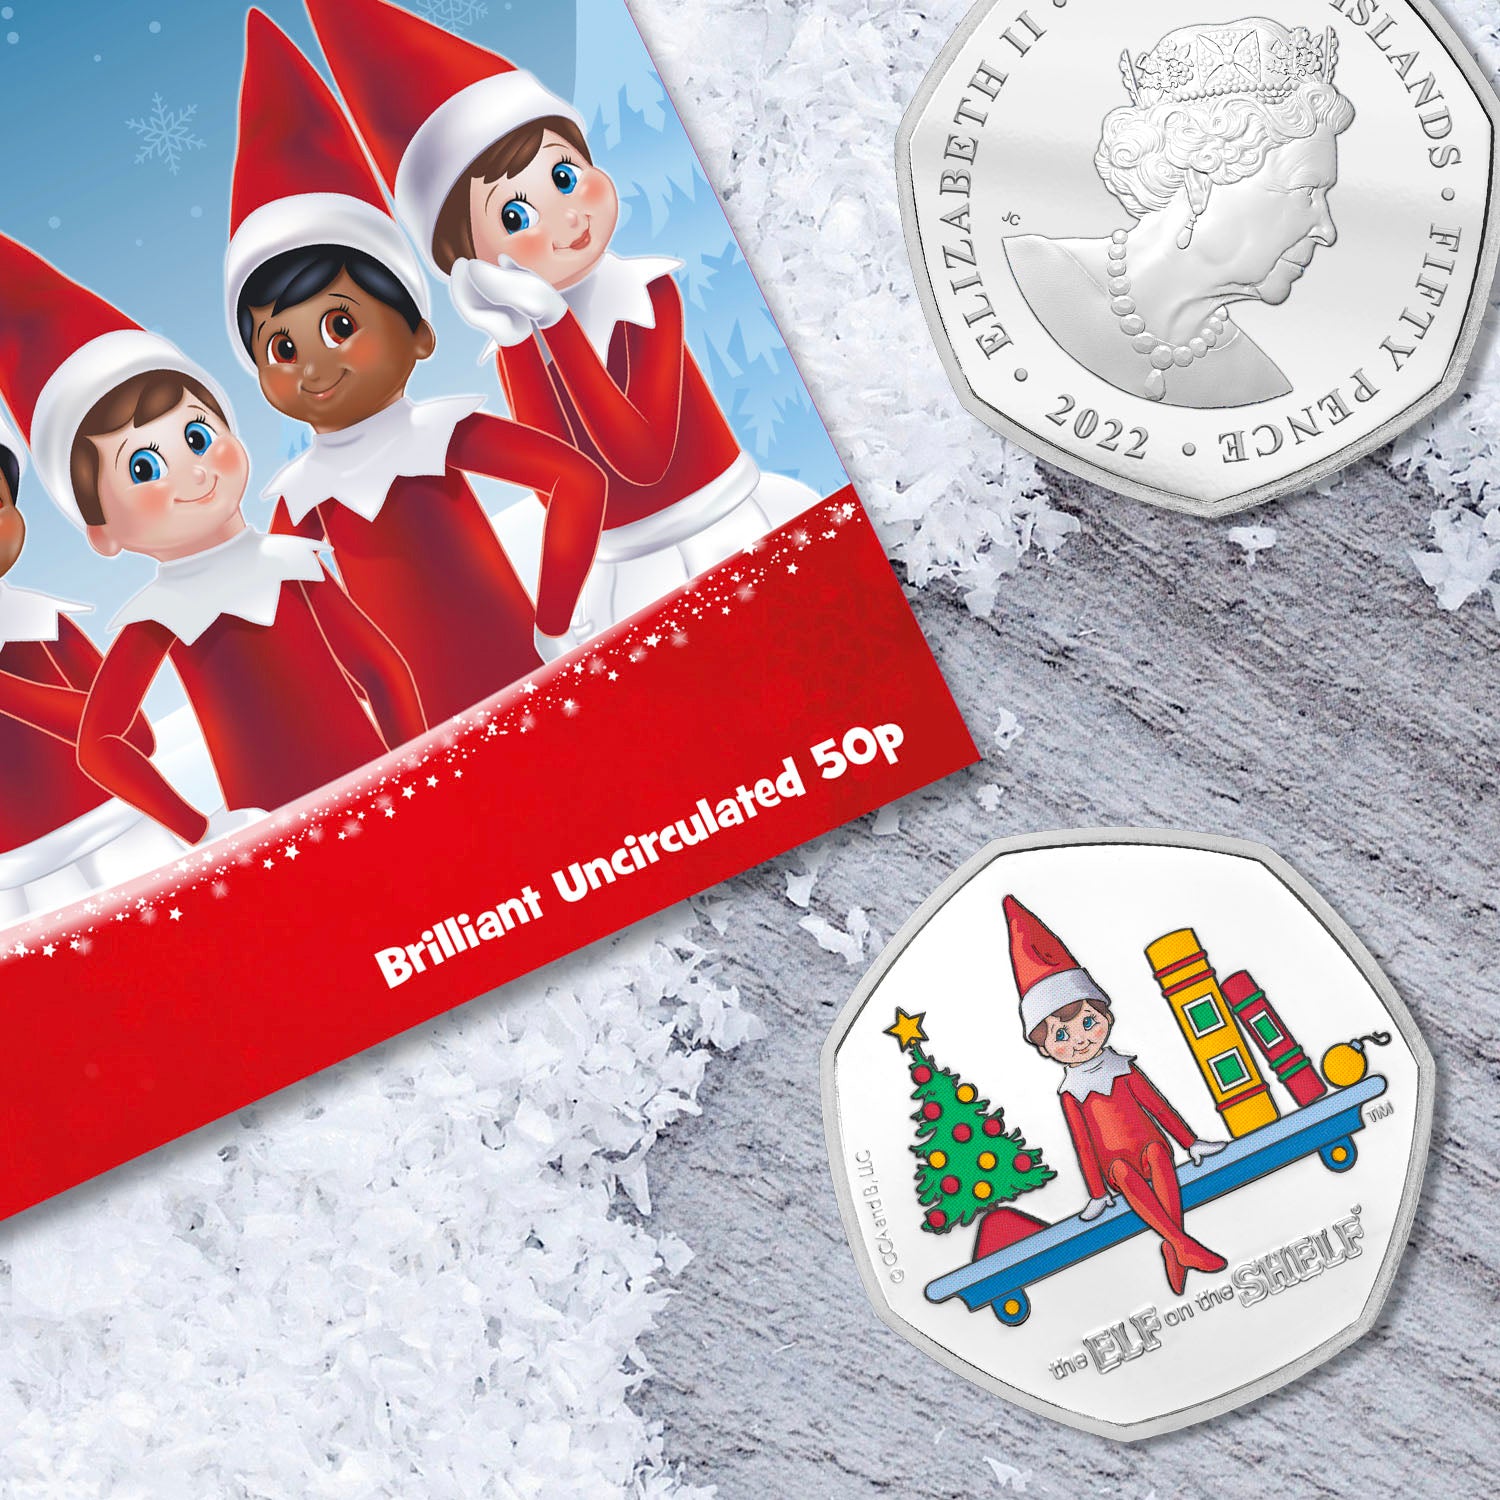 The Official Elf on the Shelf BU 50p Coloured Coin in Christmas Card Coin